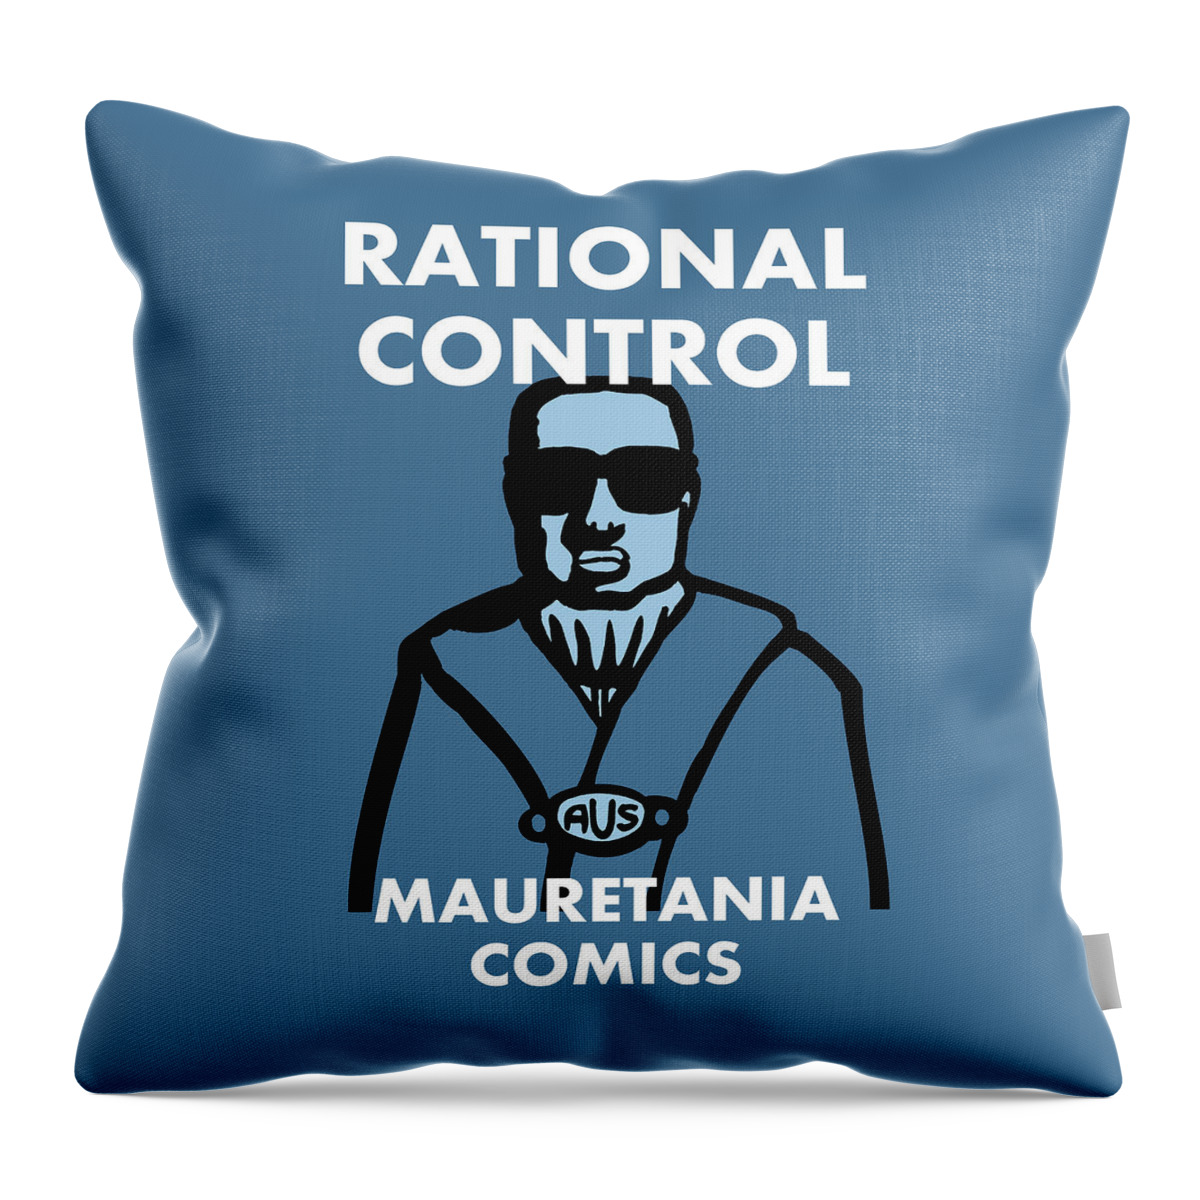 Trendy New Police Force Throw Pillow featuring the digital art Rational Control by Chris Reynolds